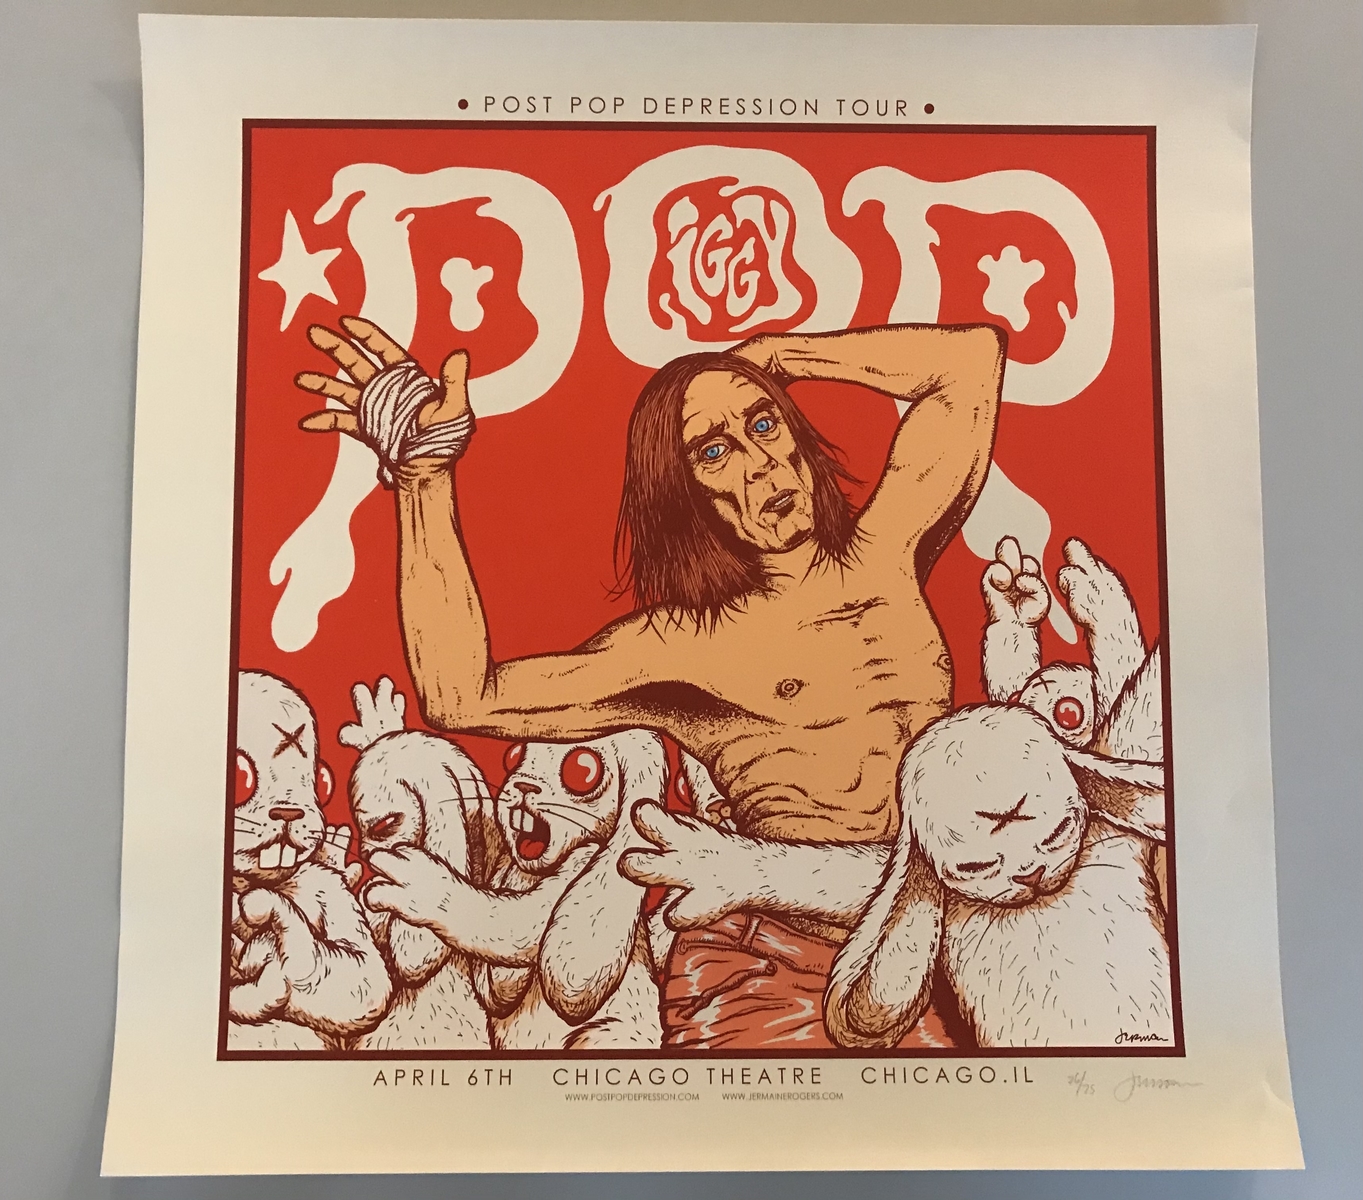 Iggy Pop - 2016 Post Pop Depression Tour, Chicago Theatre, Chicago - Limited Edition Concert Poster by Jermaine Rogers